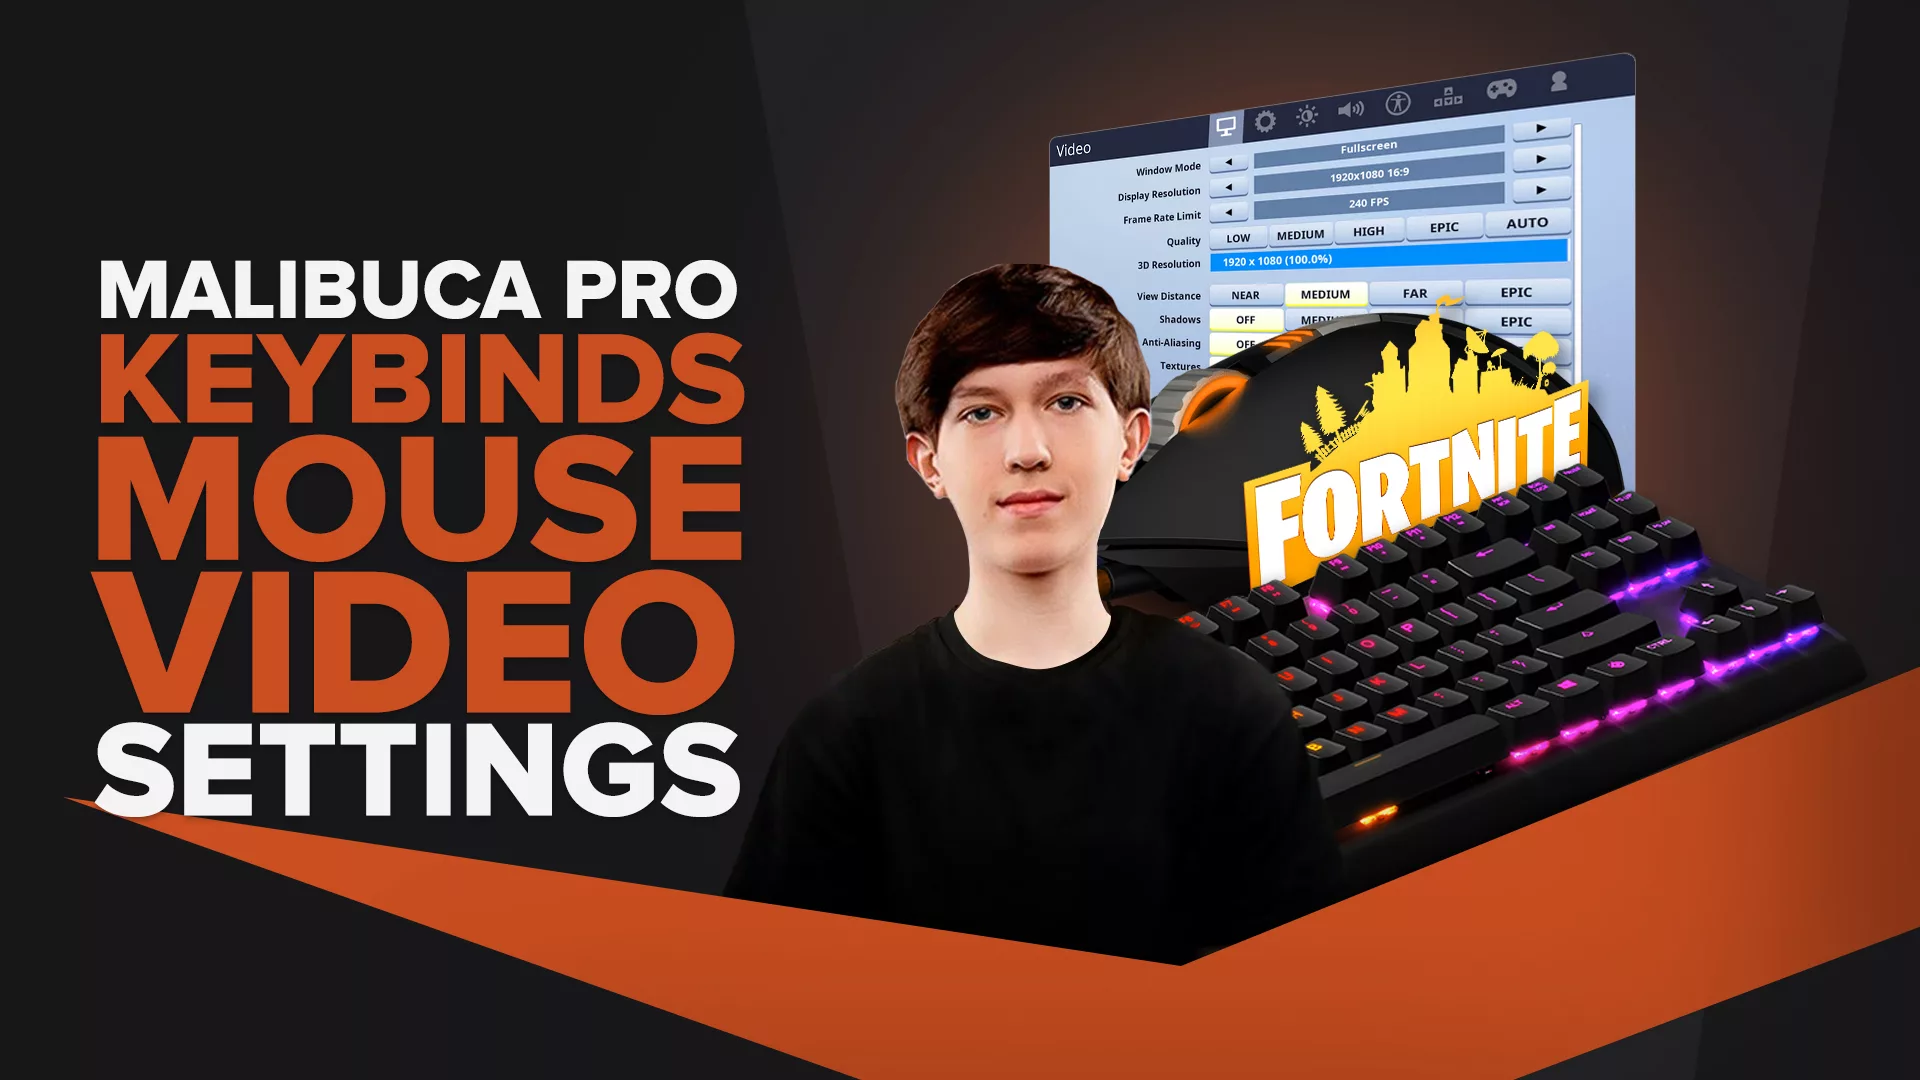 Malibuca's | Keybinds, Mouse, Video Pro Fornite Settings